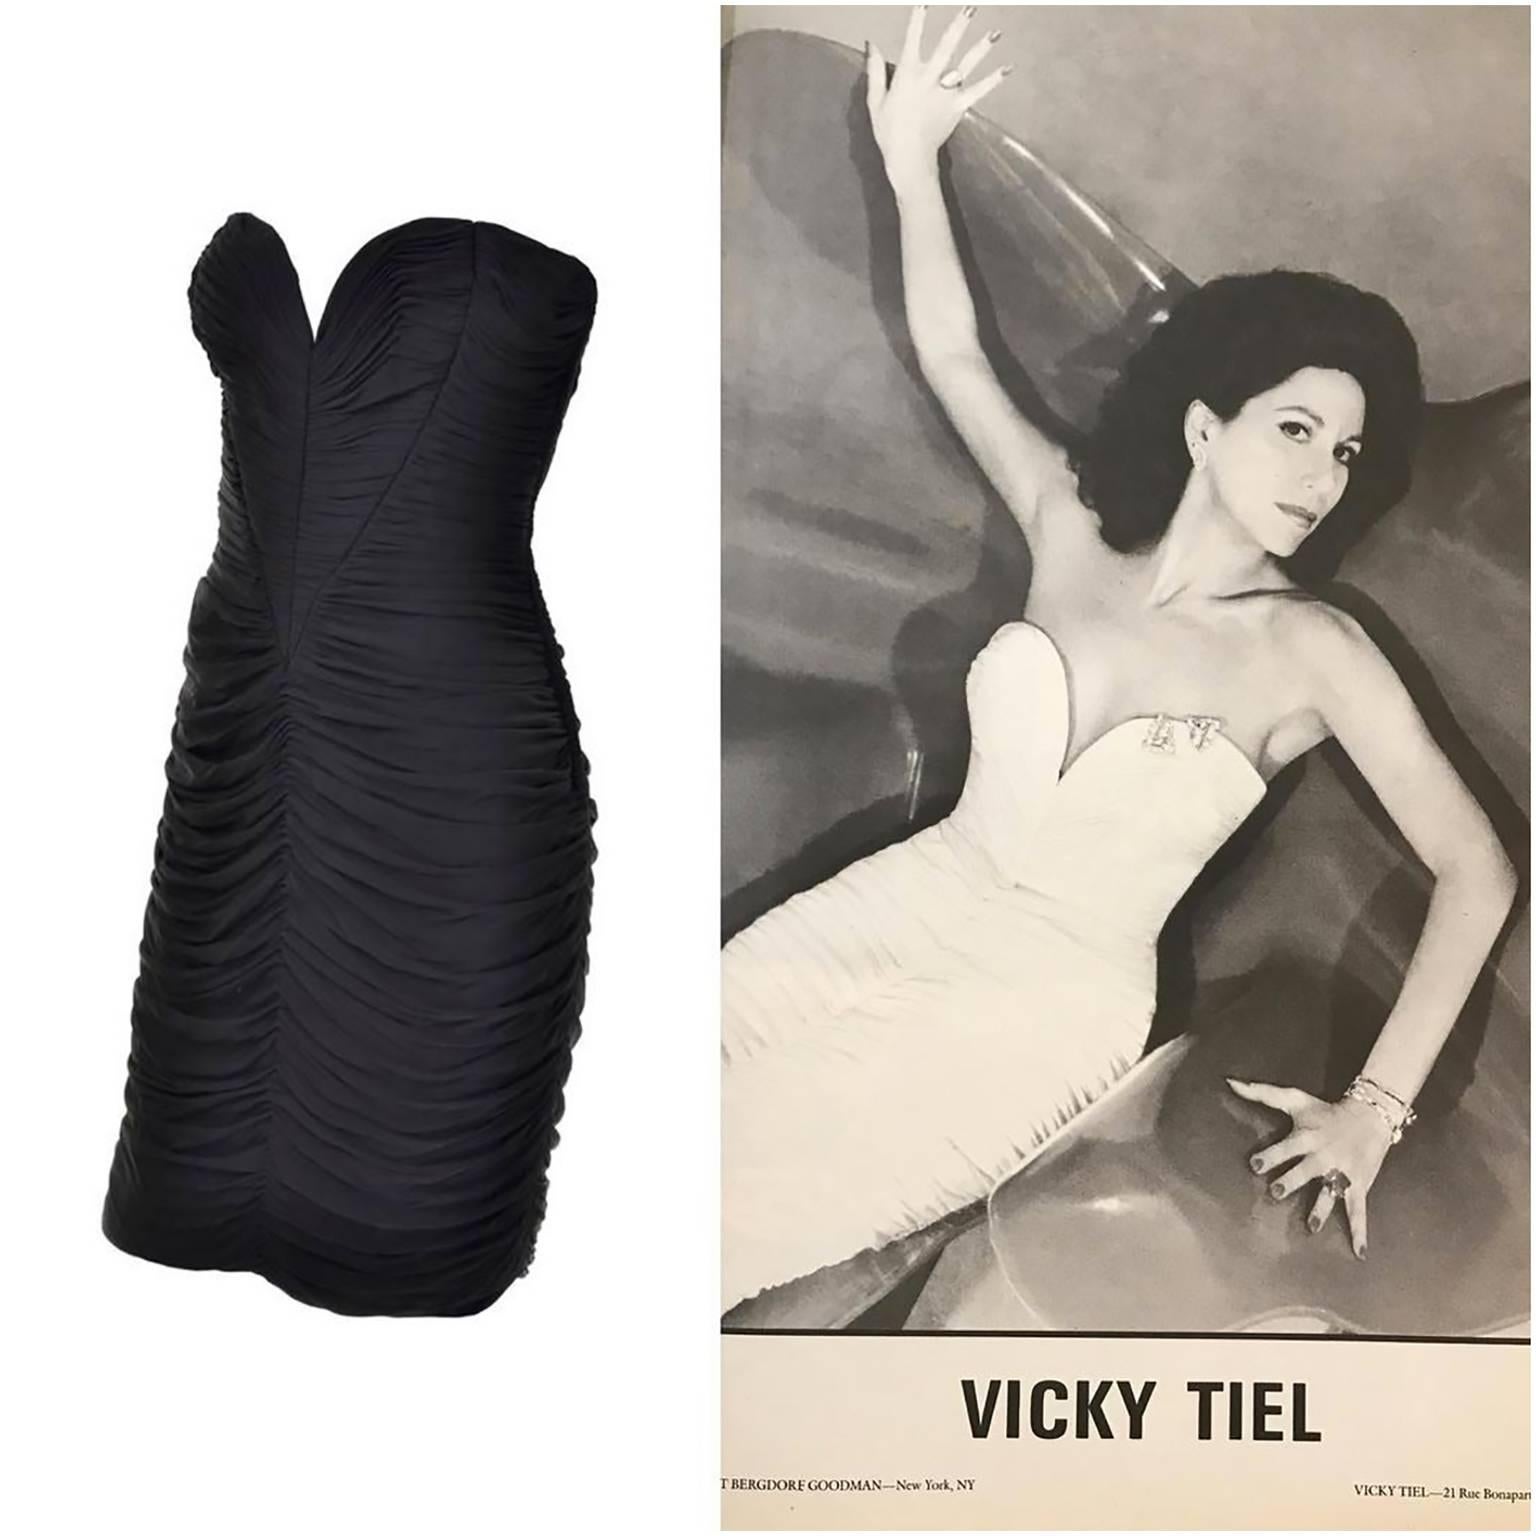 This is an outstanding vintage dress designed by Vicky Tiel in the 1980's. We are showing the full page ad of the dress in white as it appeared in Andy Warhol's magazine 